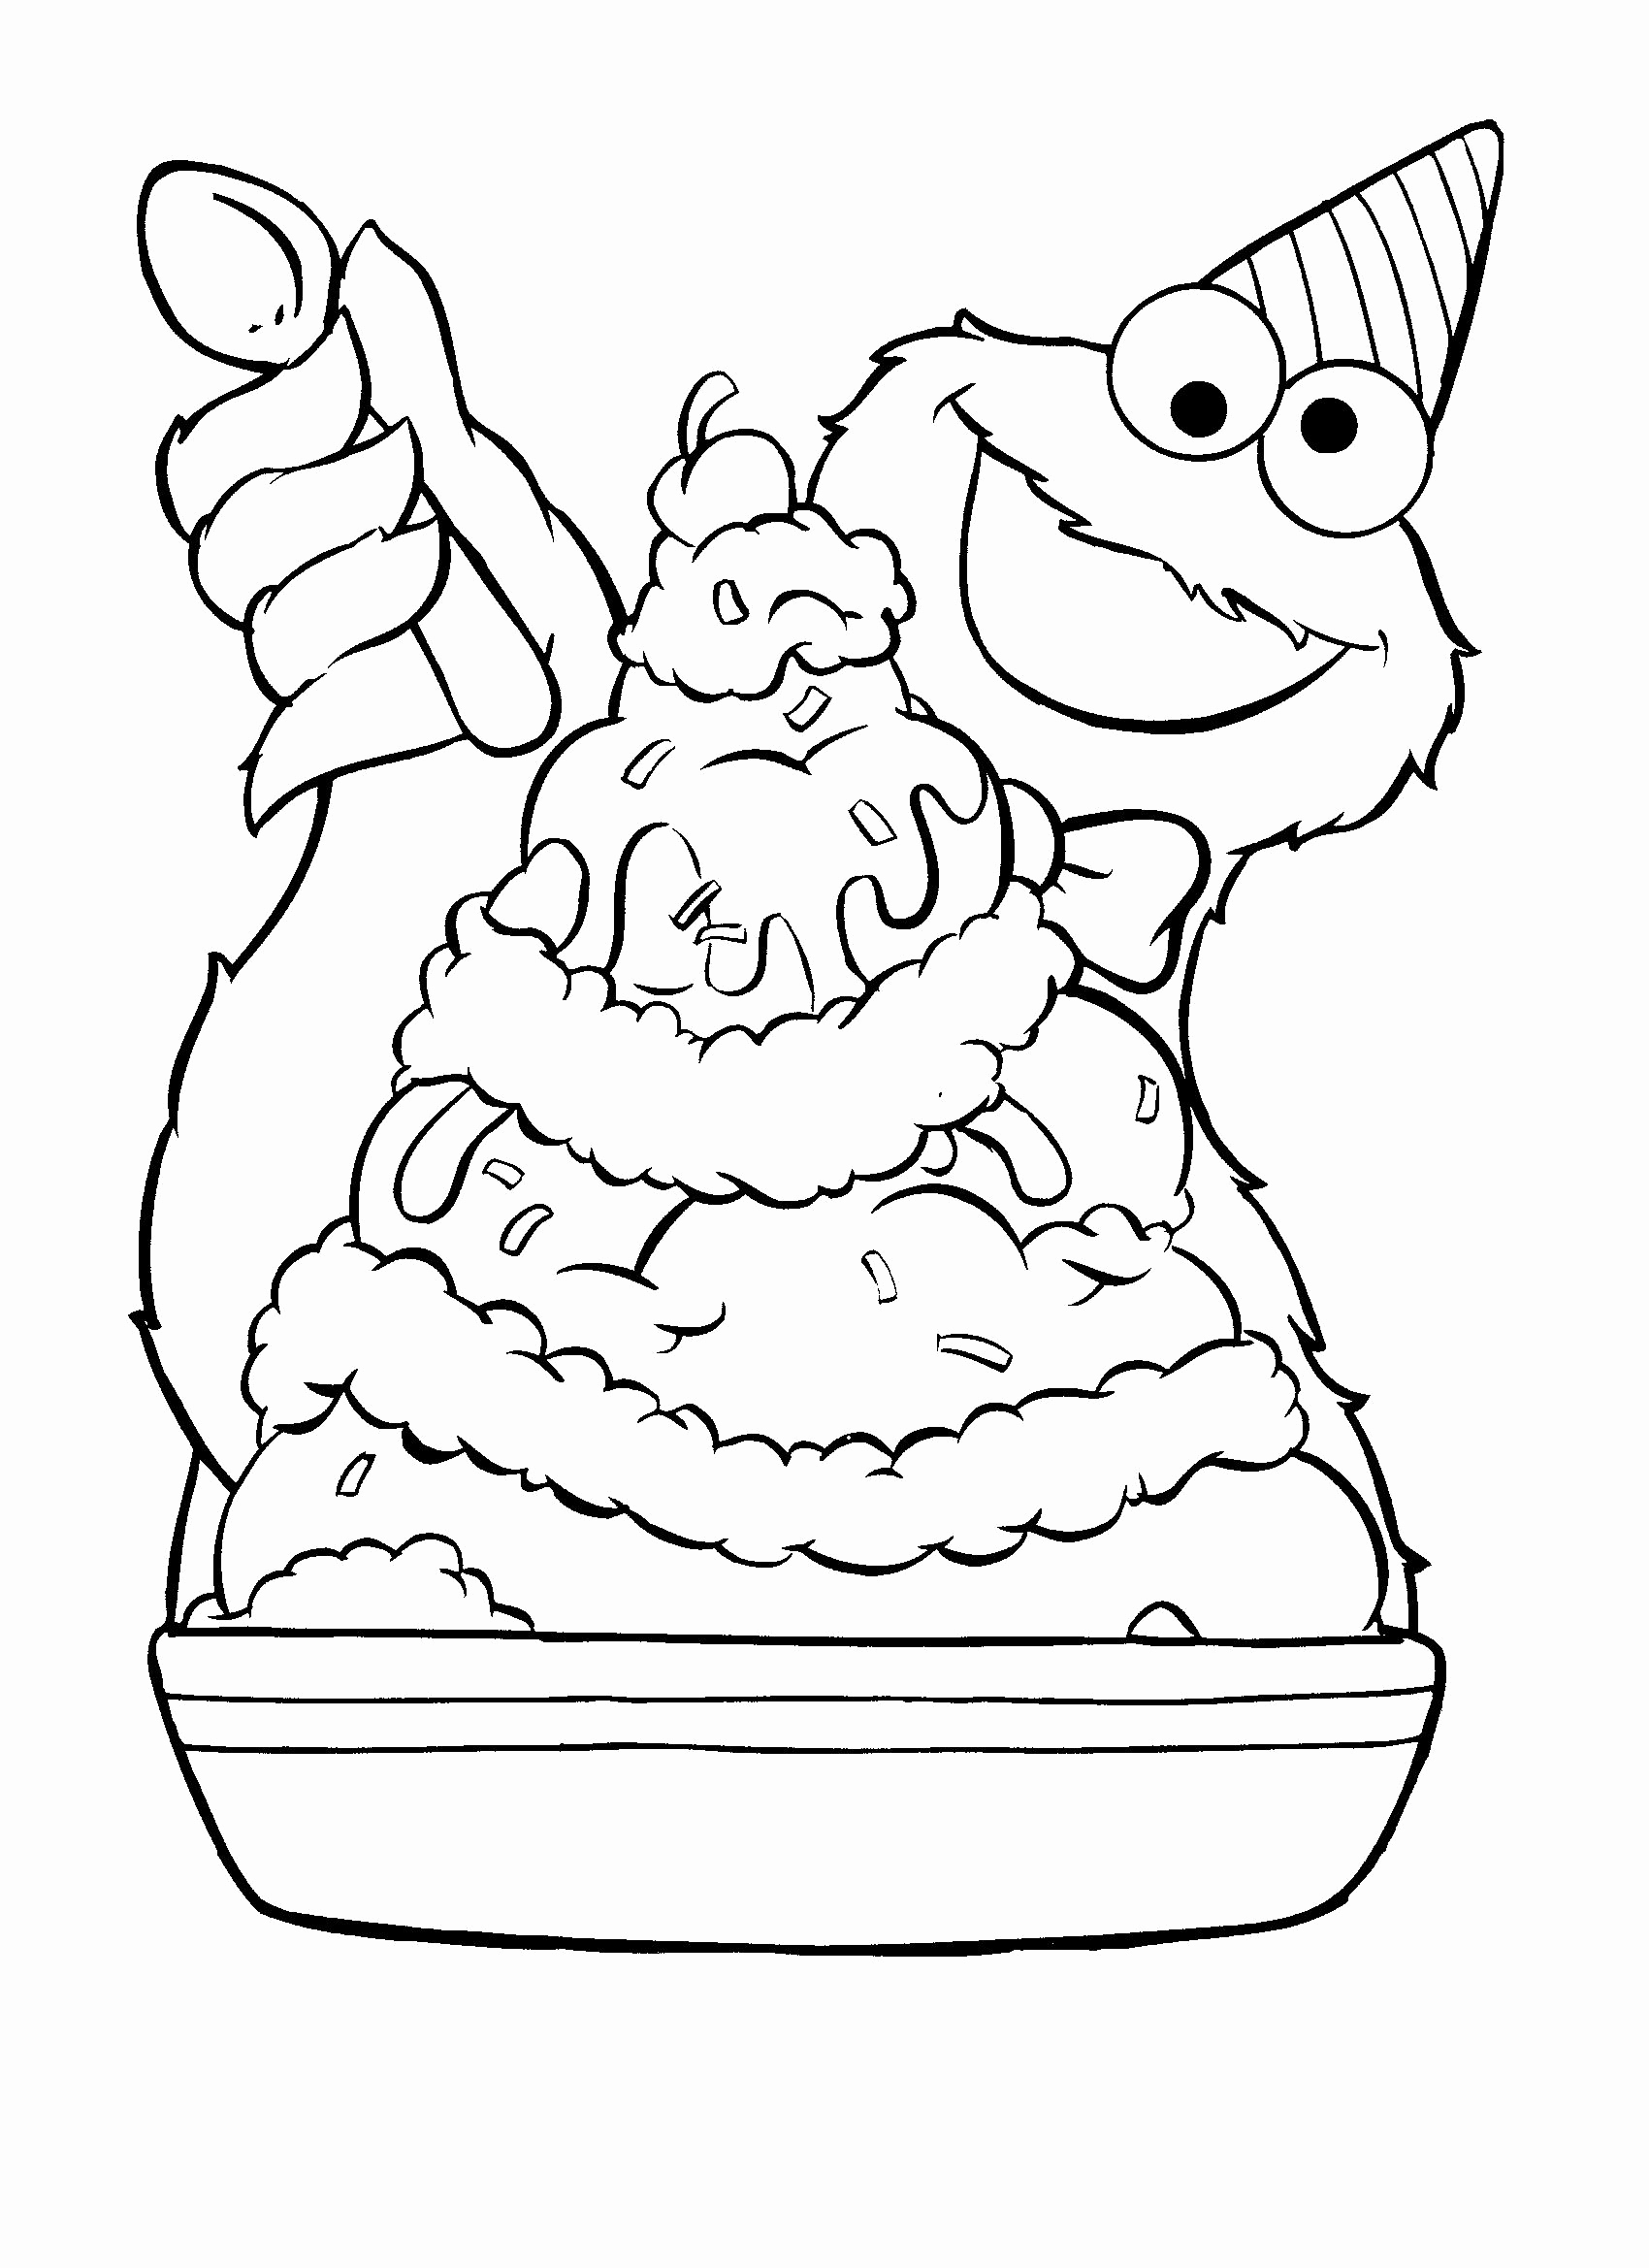 cookie-monster-coloring-page-at-getcolorings-free-printable